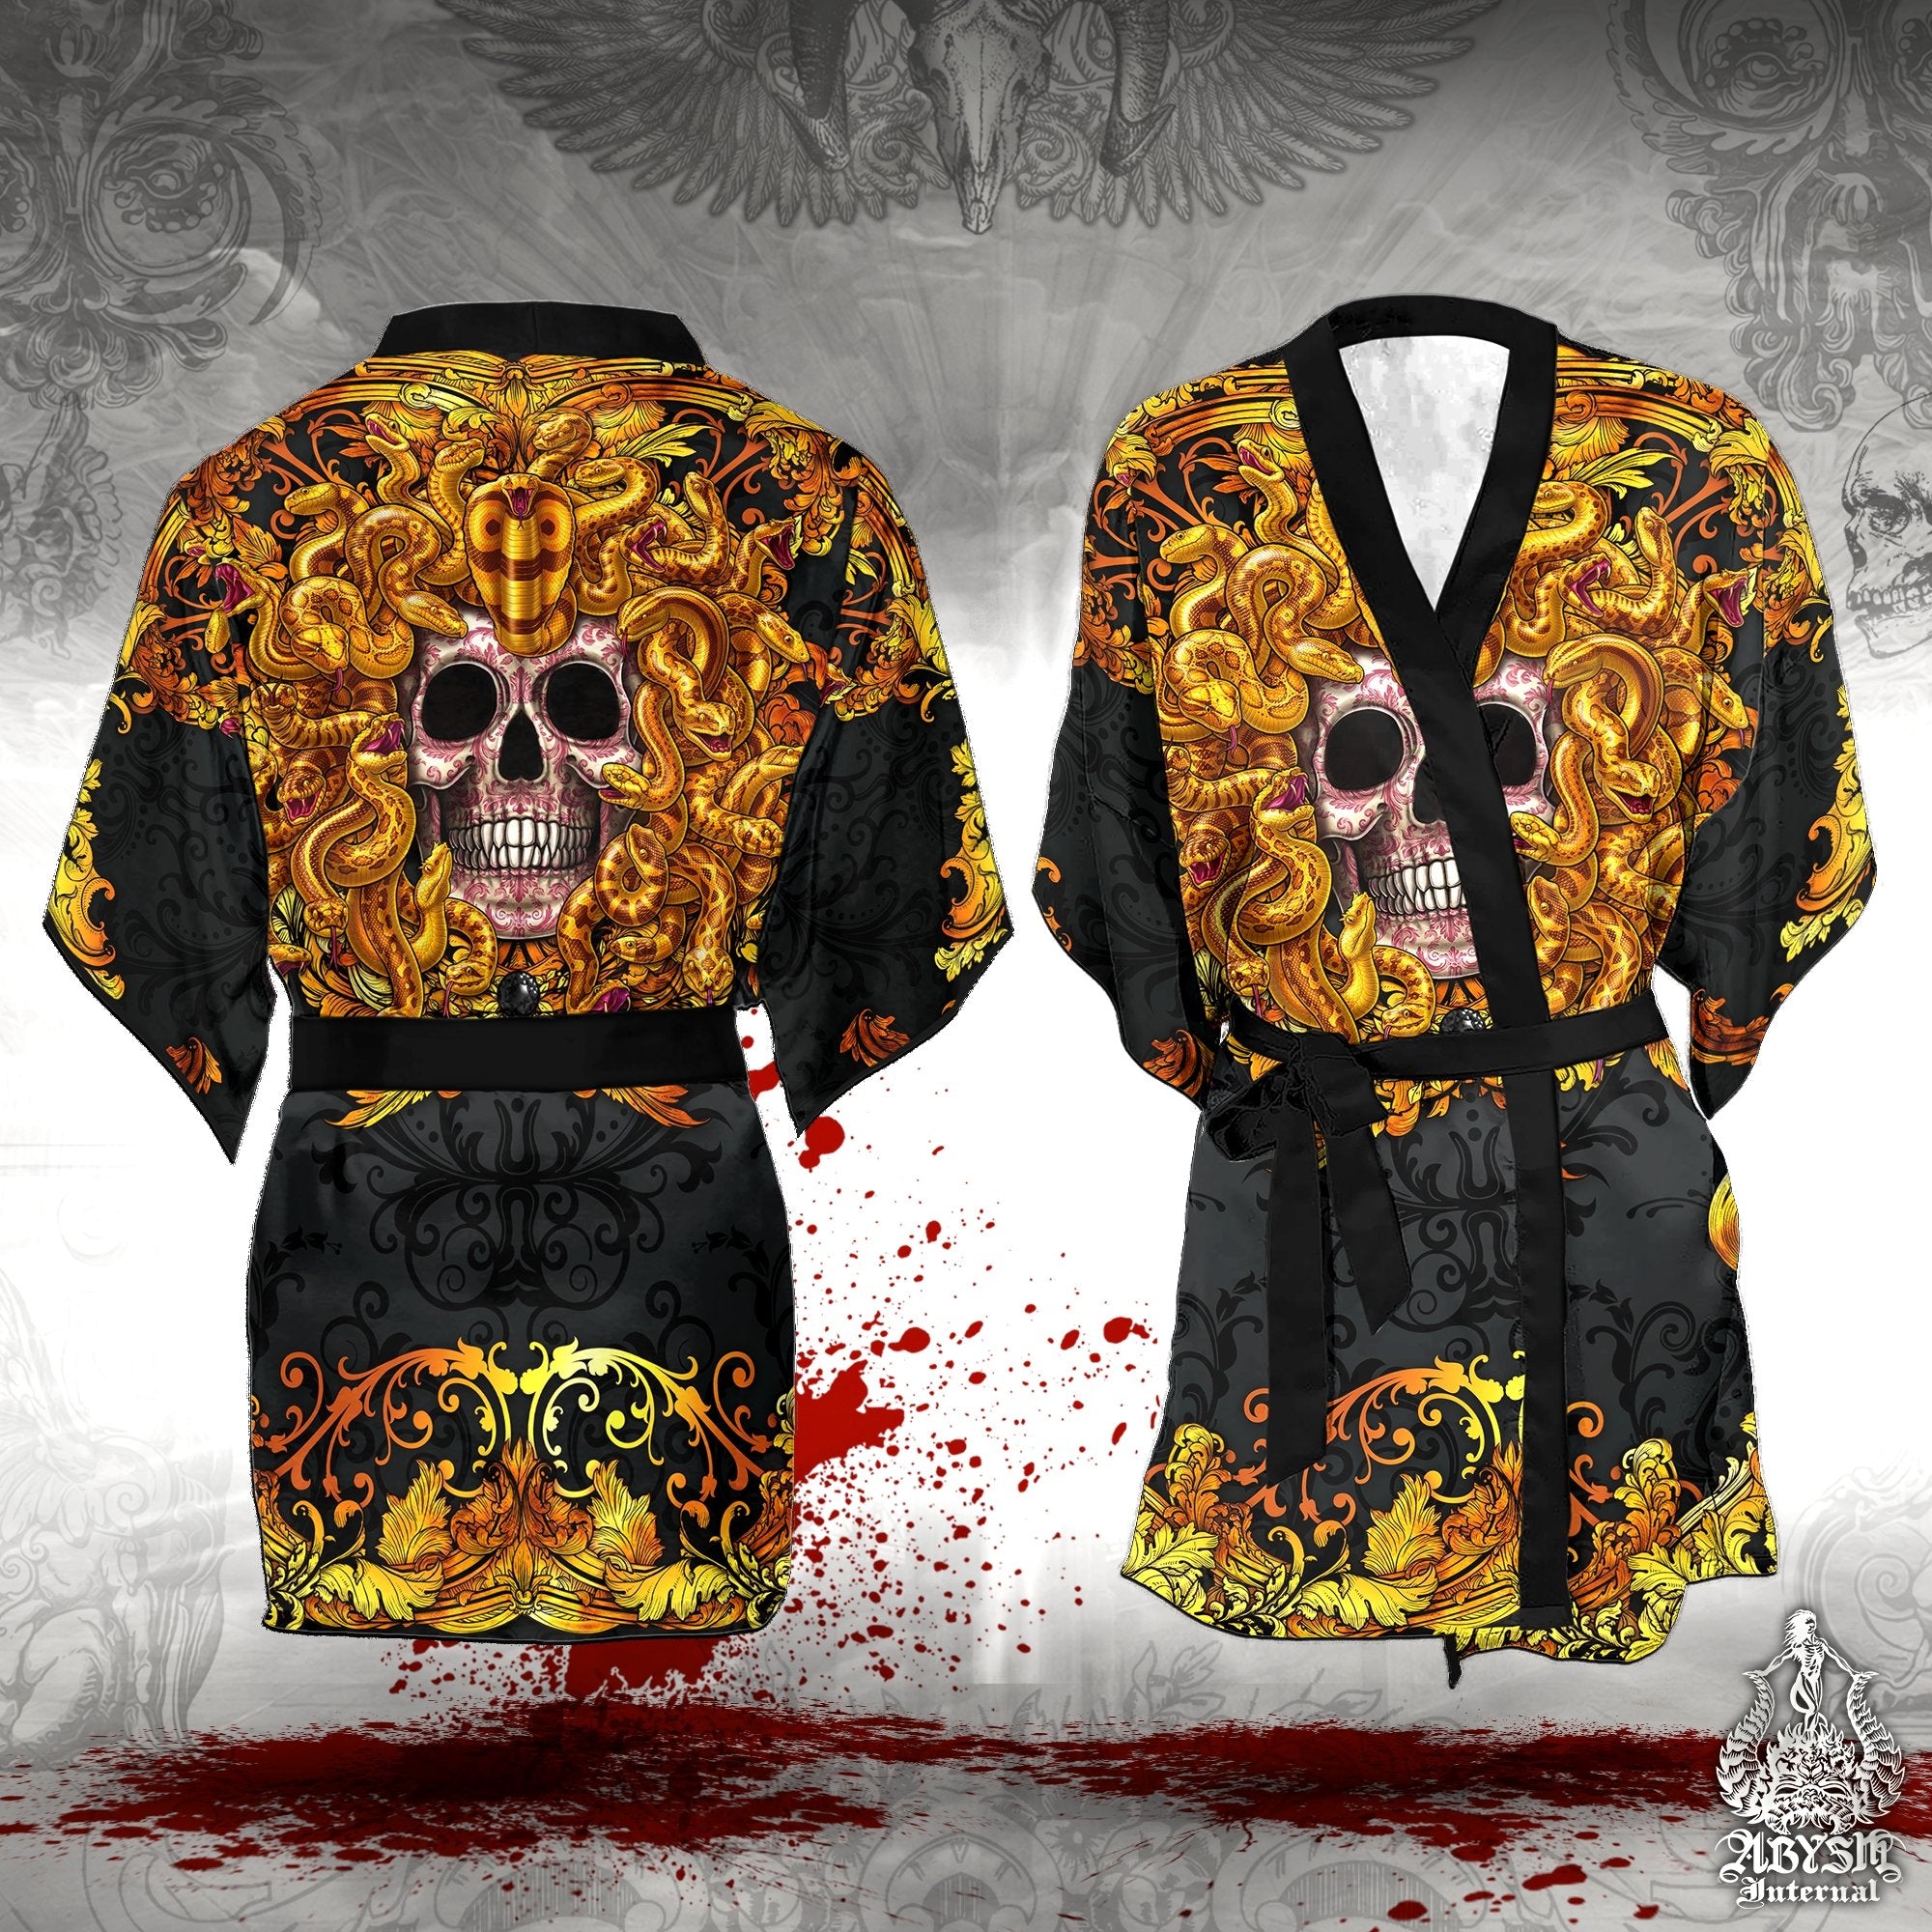 Medusa Skull Cover Up, Beach Outfit, Party Kimono, Summer Festival Robe, Indie and Alternative Clothing, Unisex - Gold - Abysm Internal